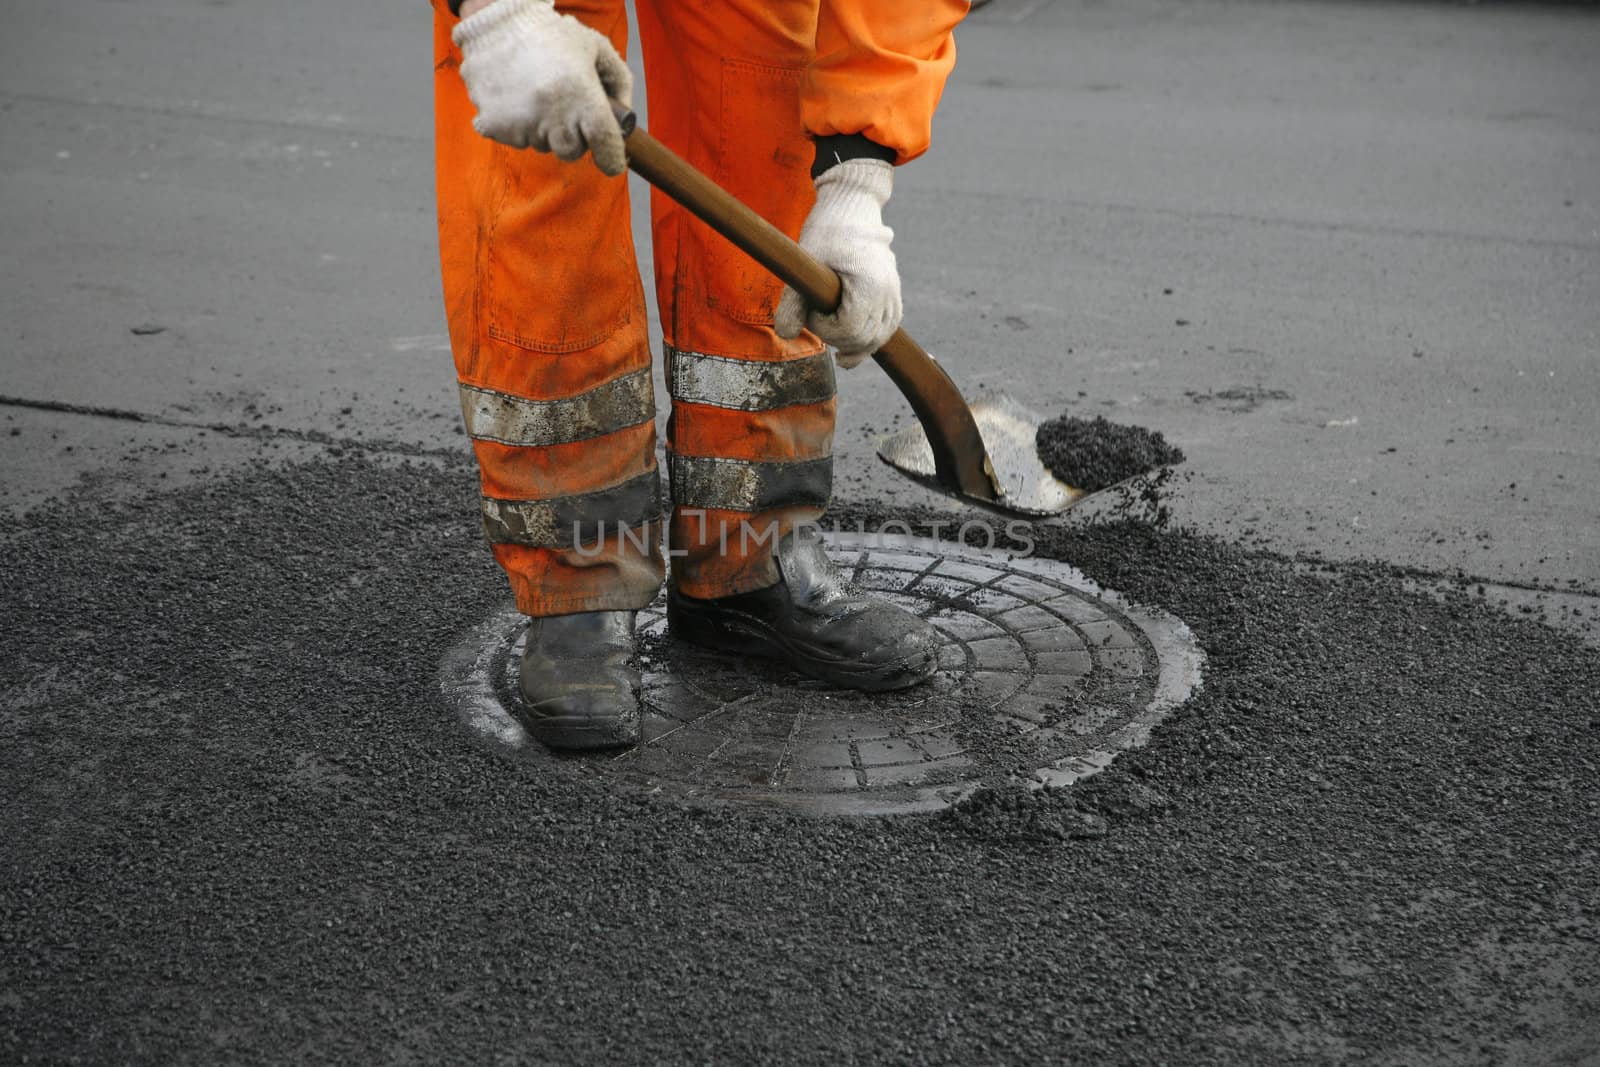 Asphalt worker in action by ABCDK